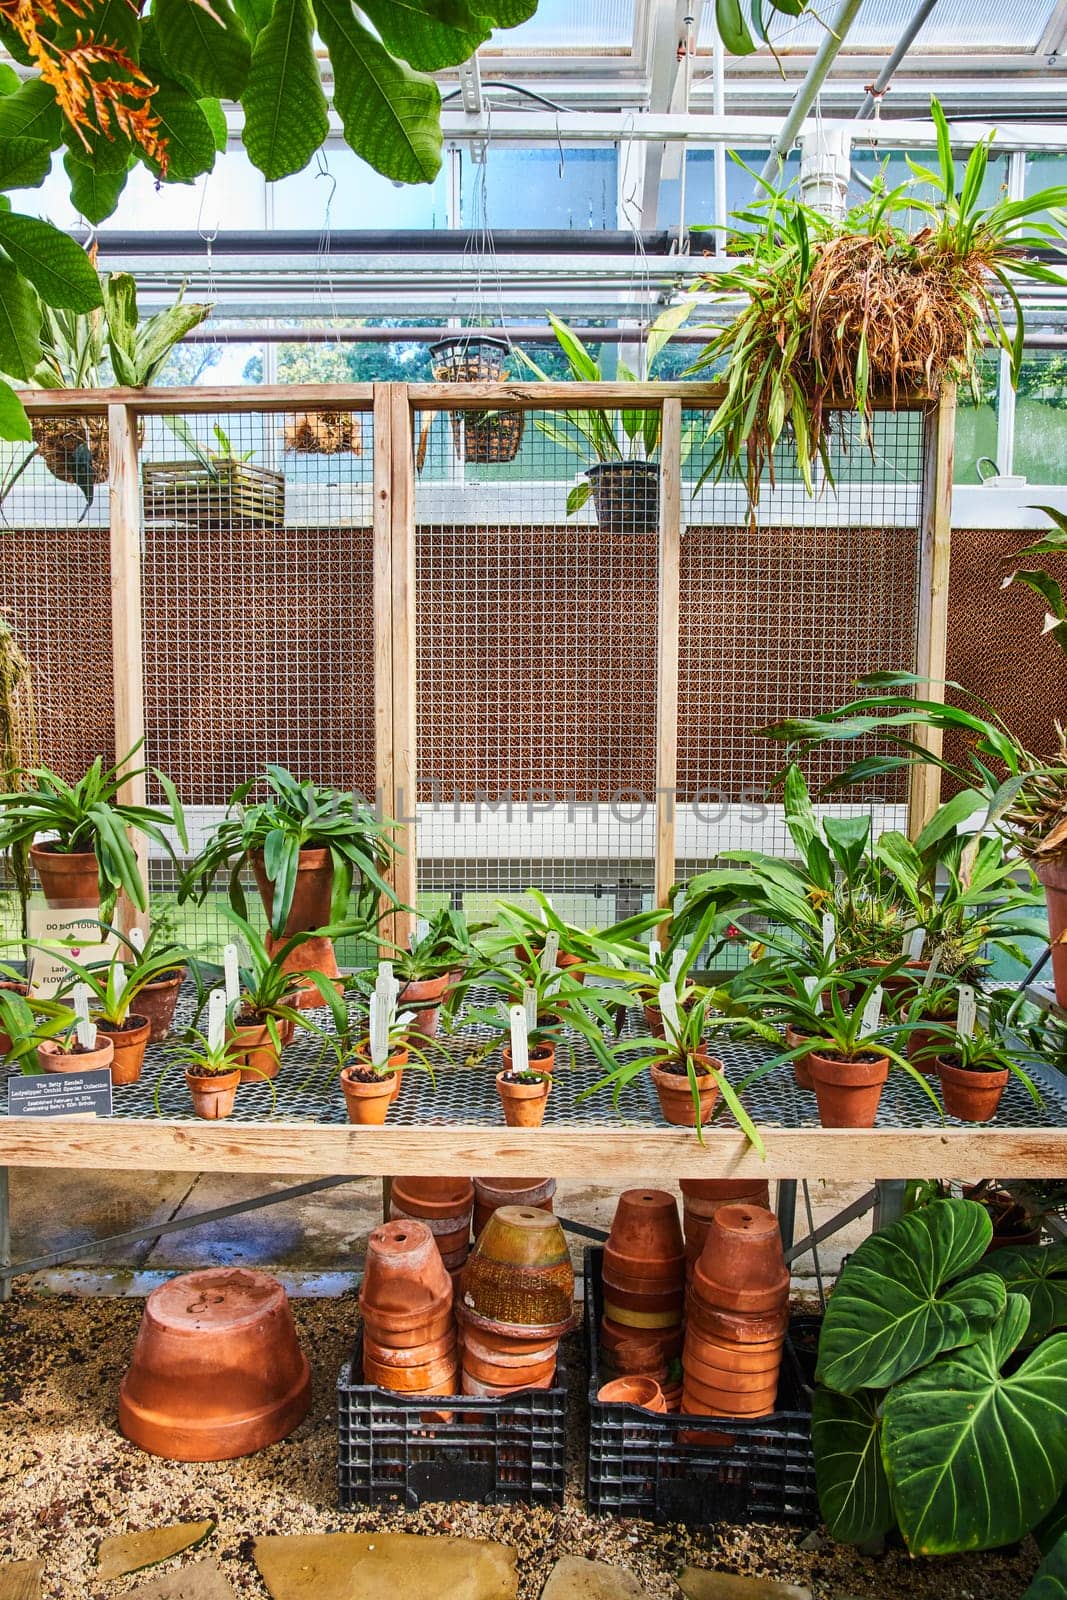 Lush Greenhouse Oasis with Tropical Plants and Terracotta Pots by njproductions